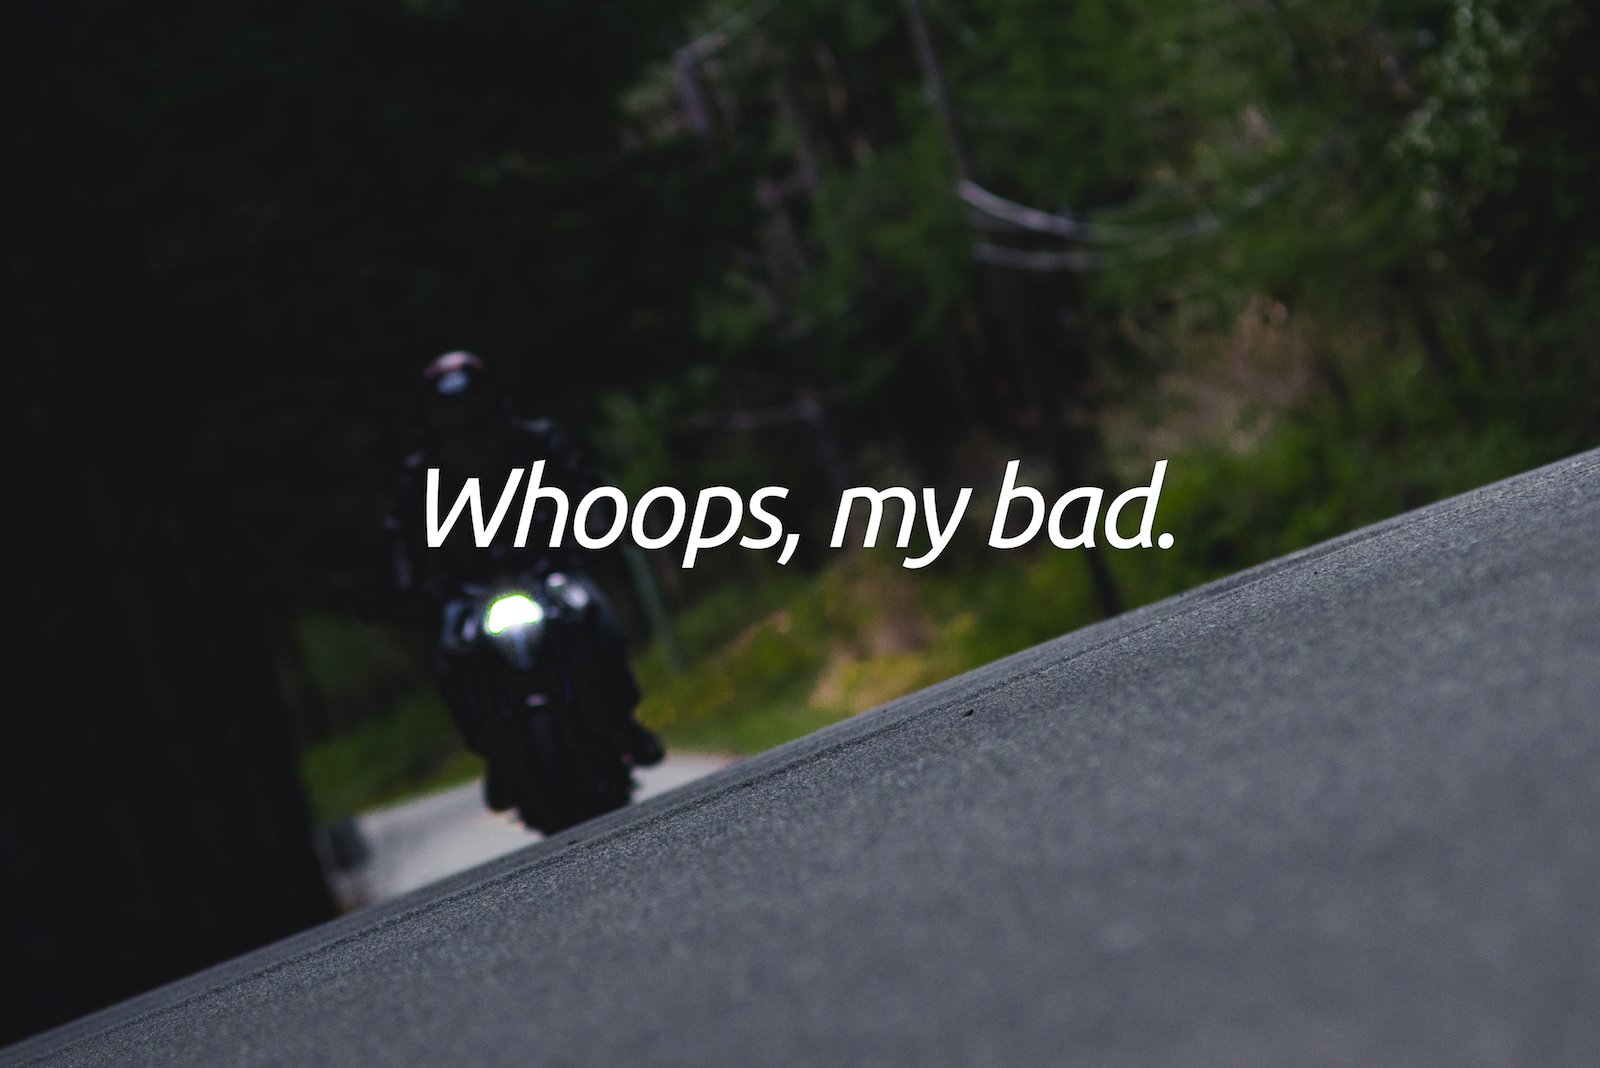  lessons learned from botched motorcycle photo shoots 